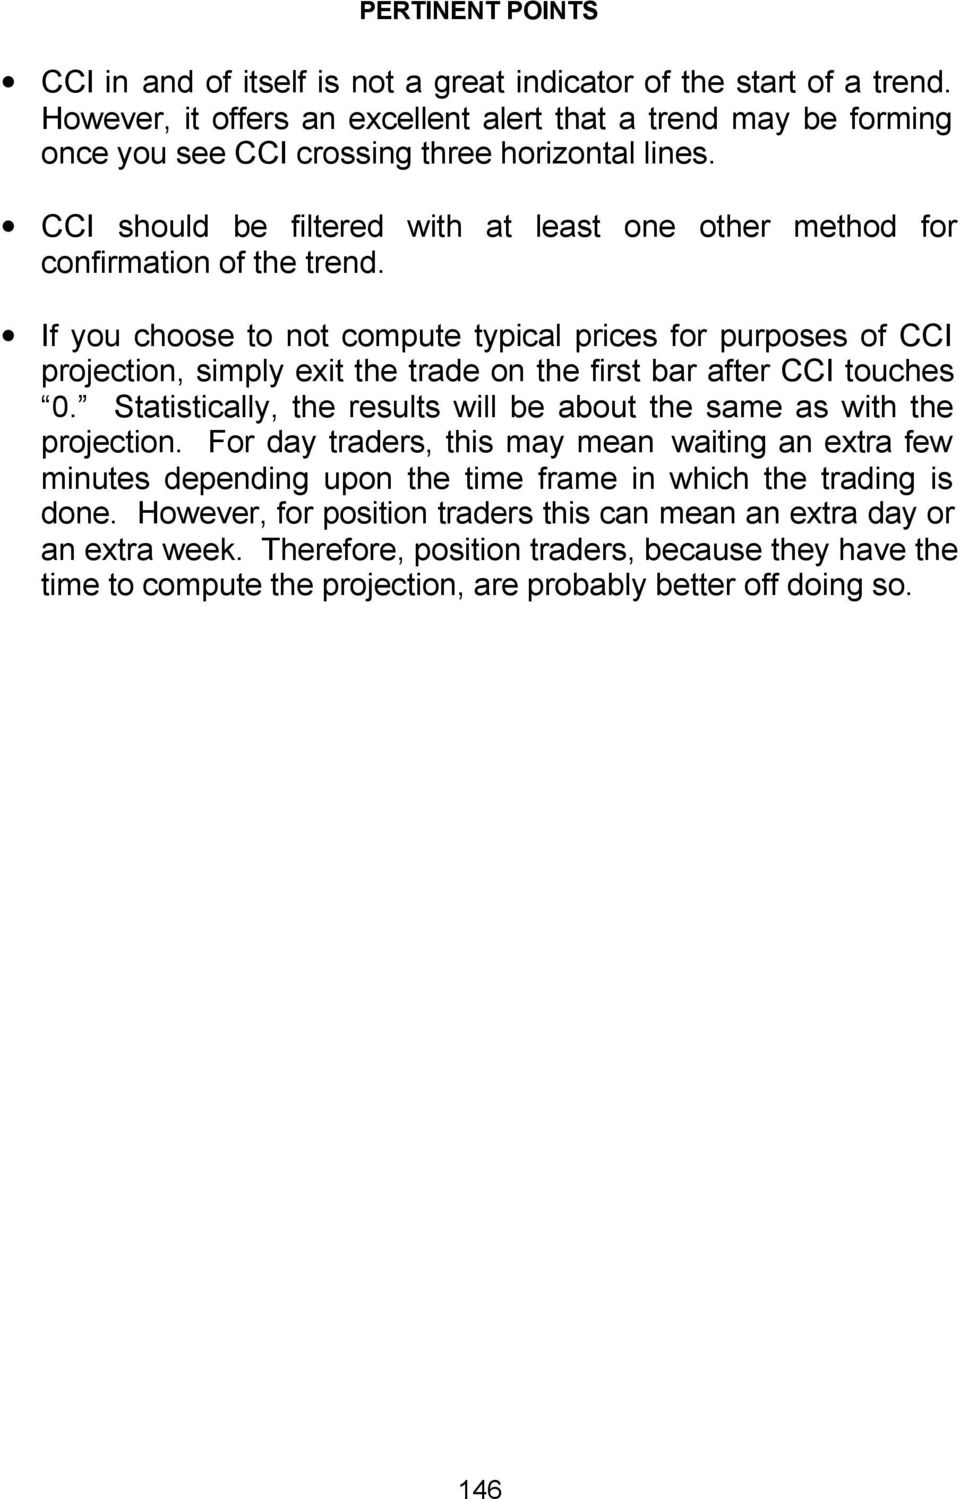 If you choose to not compute typical prices for purposes of CCI projection, simply exit the trade on the first bar after CCI touches 0.